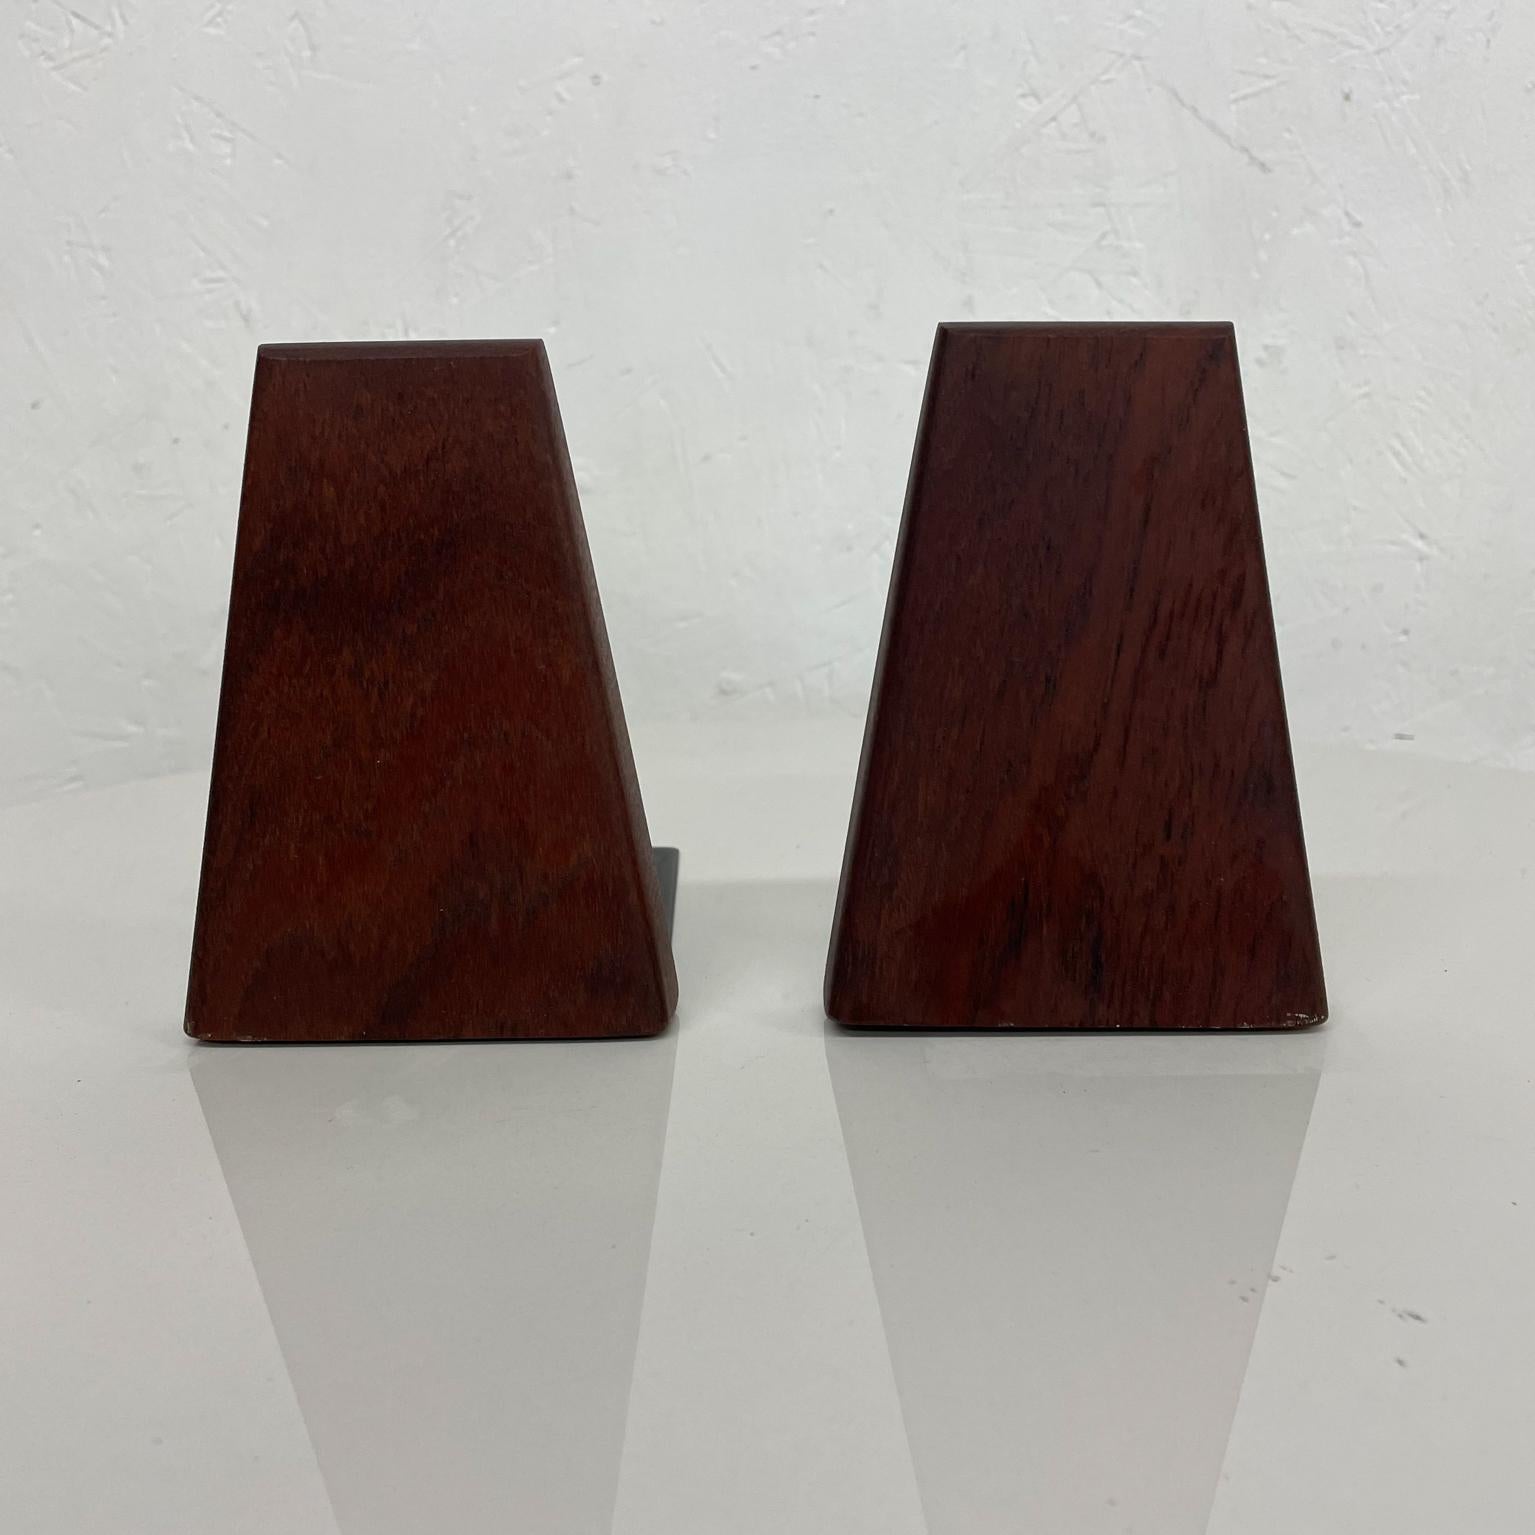 Teak Bookends
1960s Style of Kai Kristiansen Modern Bookends in Teak Wood and Metal made Denmark
Maker stamp present Denmark ESA
3.75 w x 5.13 x 5.5 d
Preowned original vintage condition.
See images provided.
 